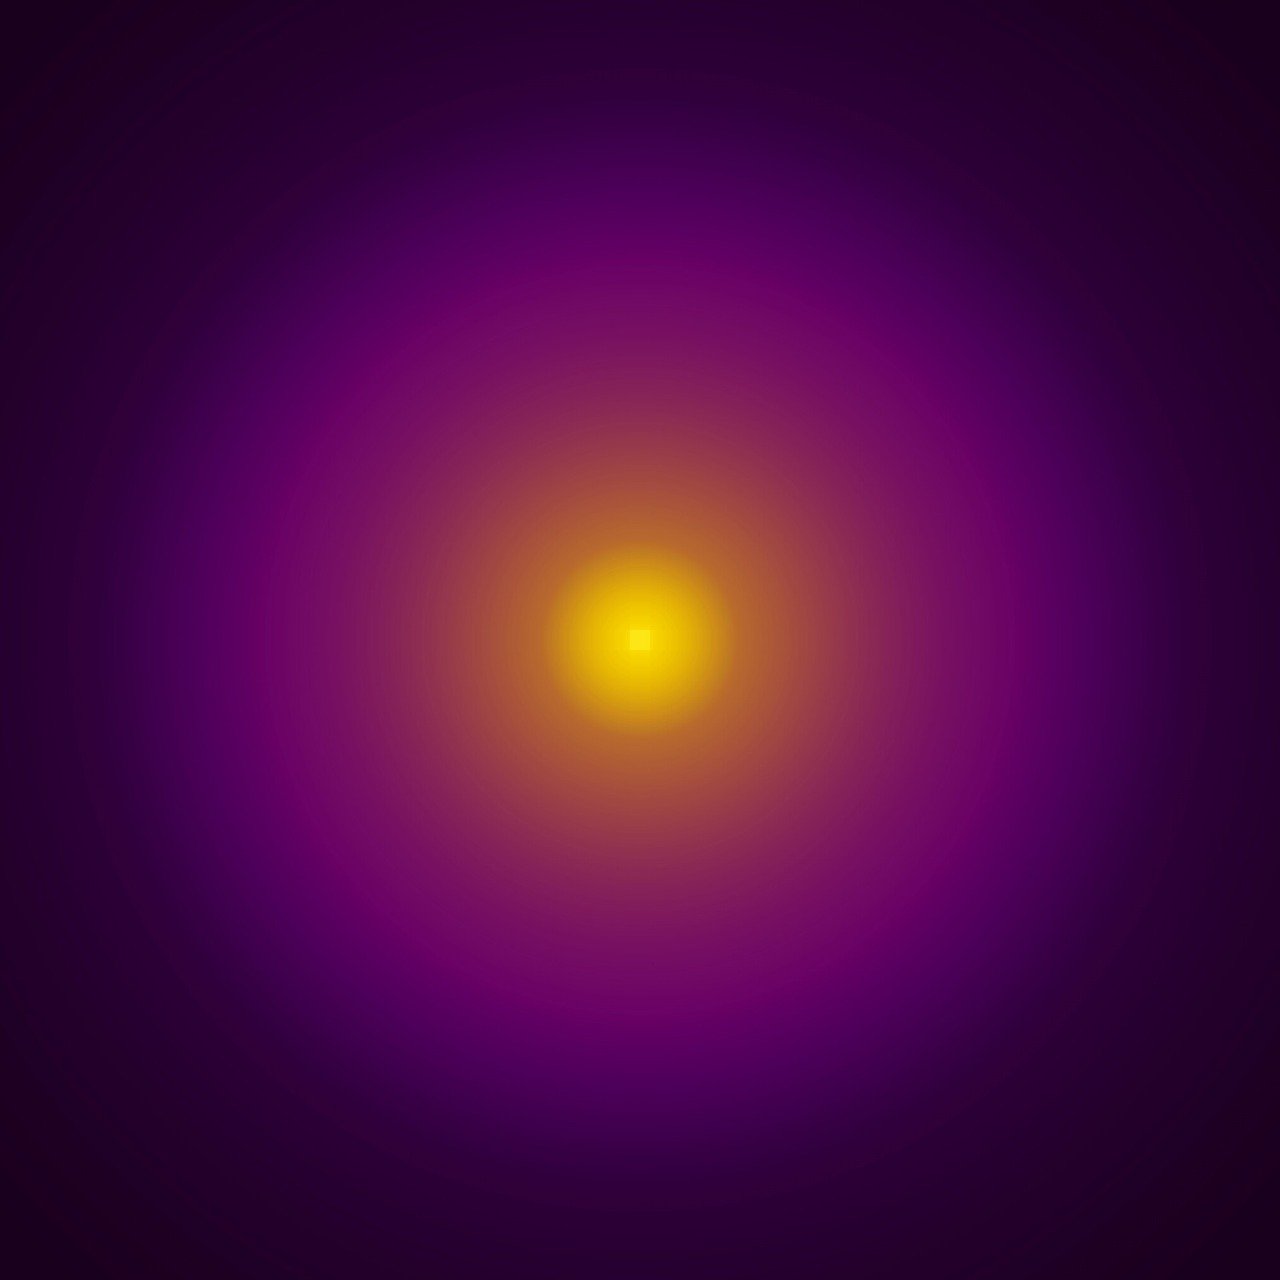 a blurry image of a yellow and purple light, a picture, minimalism, no gradients, key is on the center of image, purple sun, ( ( ( ( volumetric light ) ) ) )